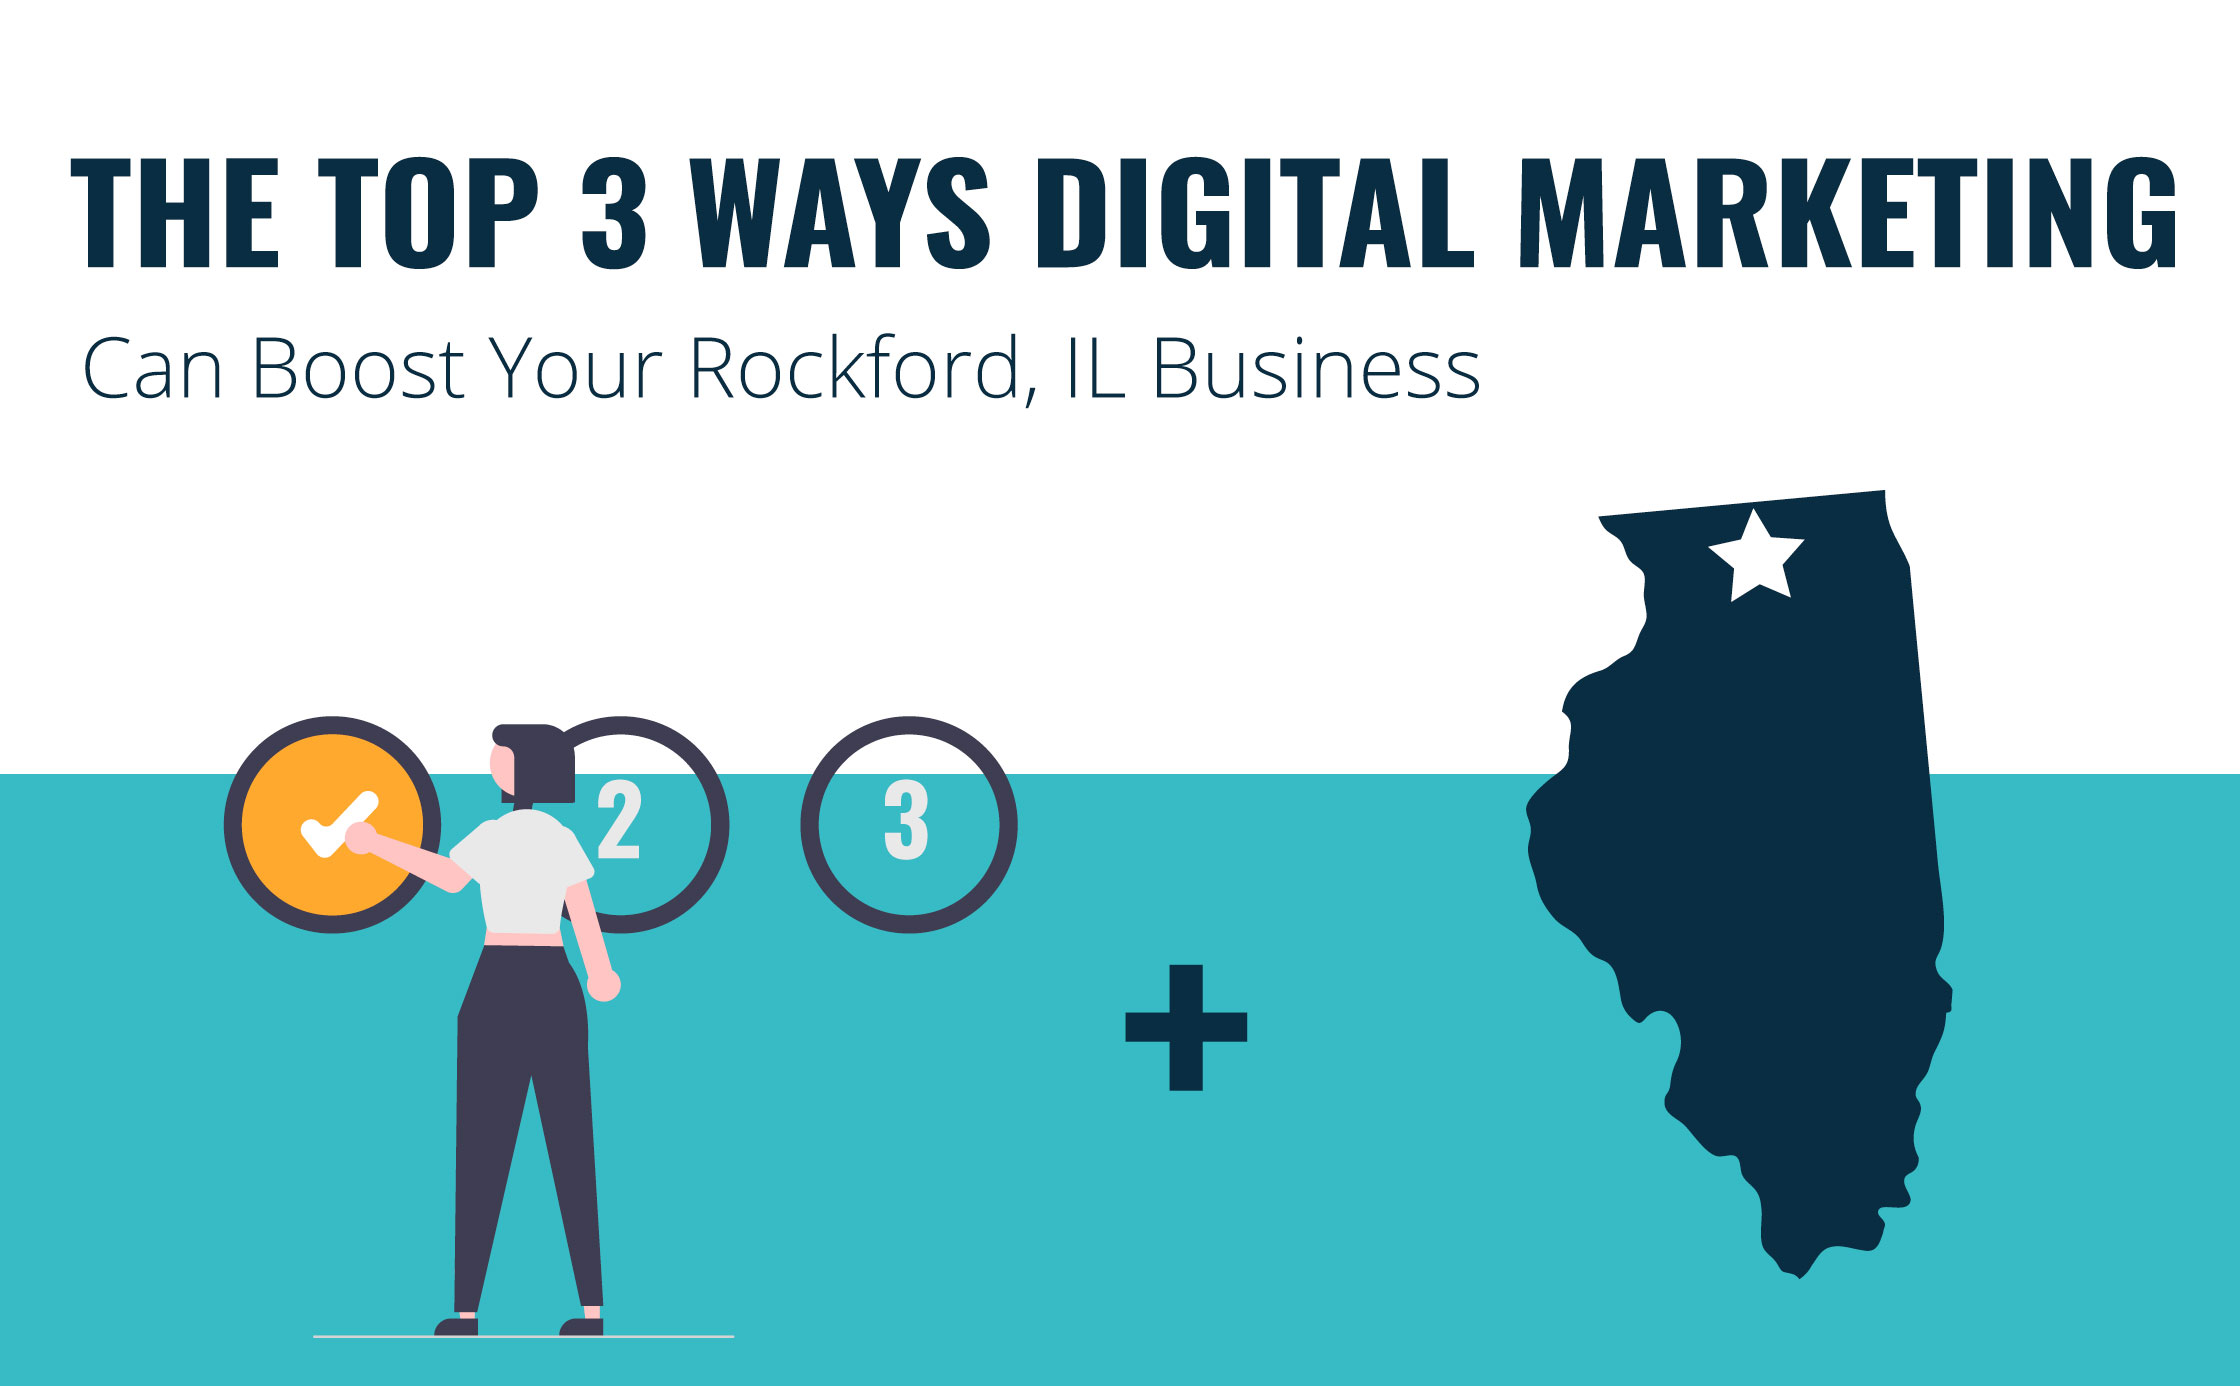 The Top 3 Ways Digital Marketing Can Boost Your Rockford, IL Business